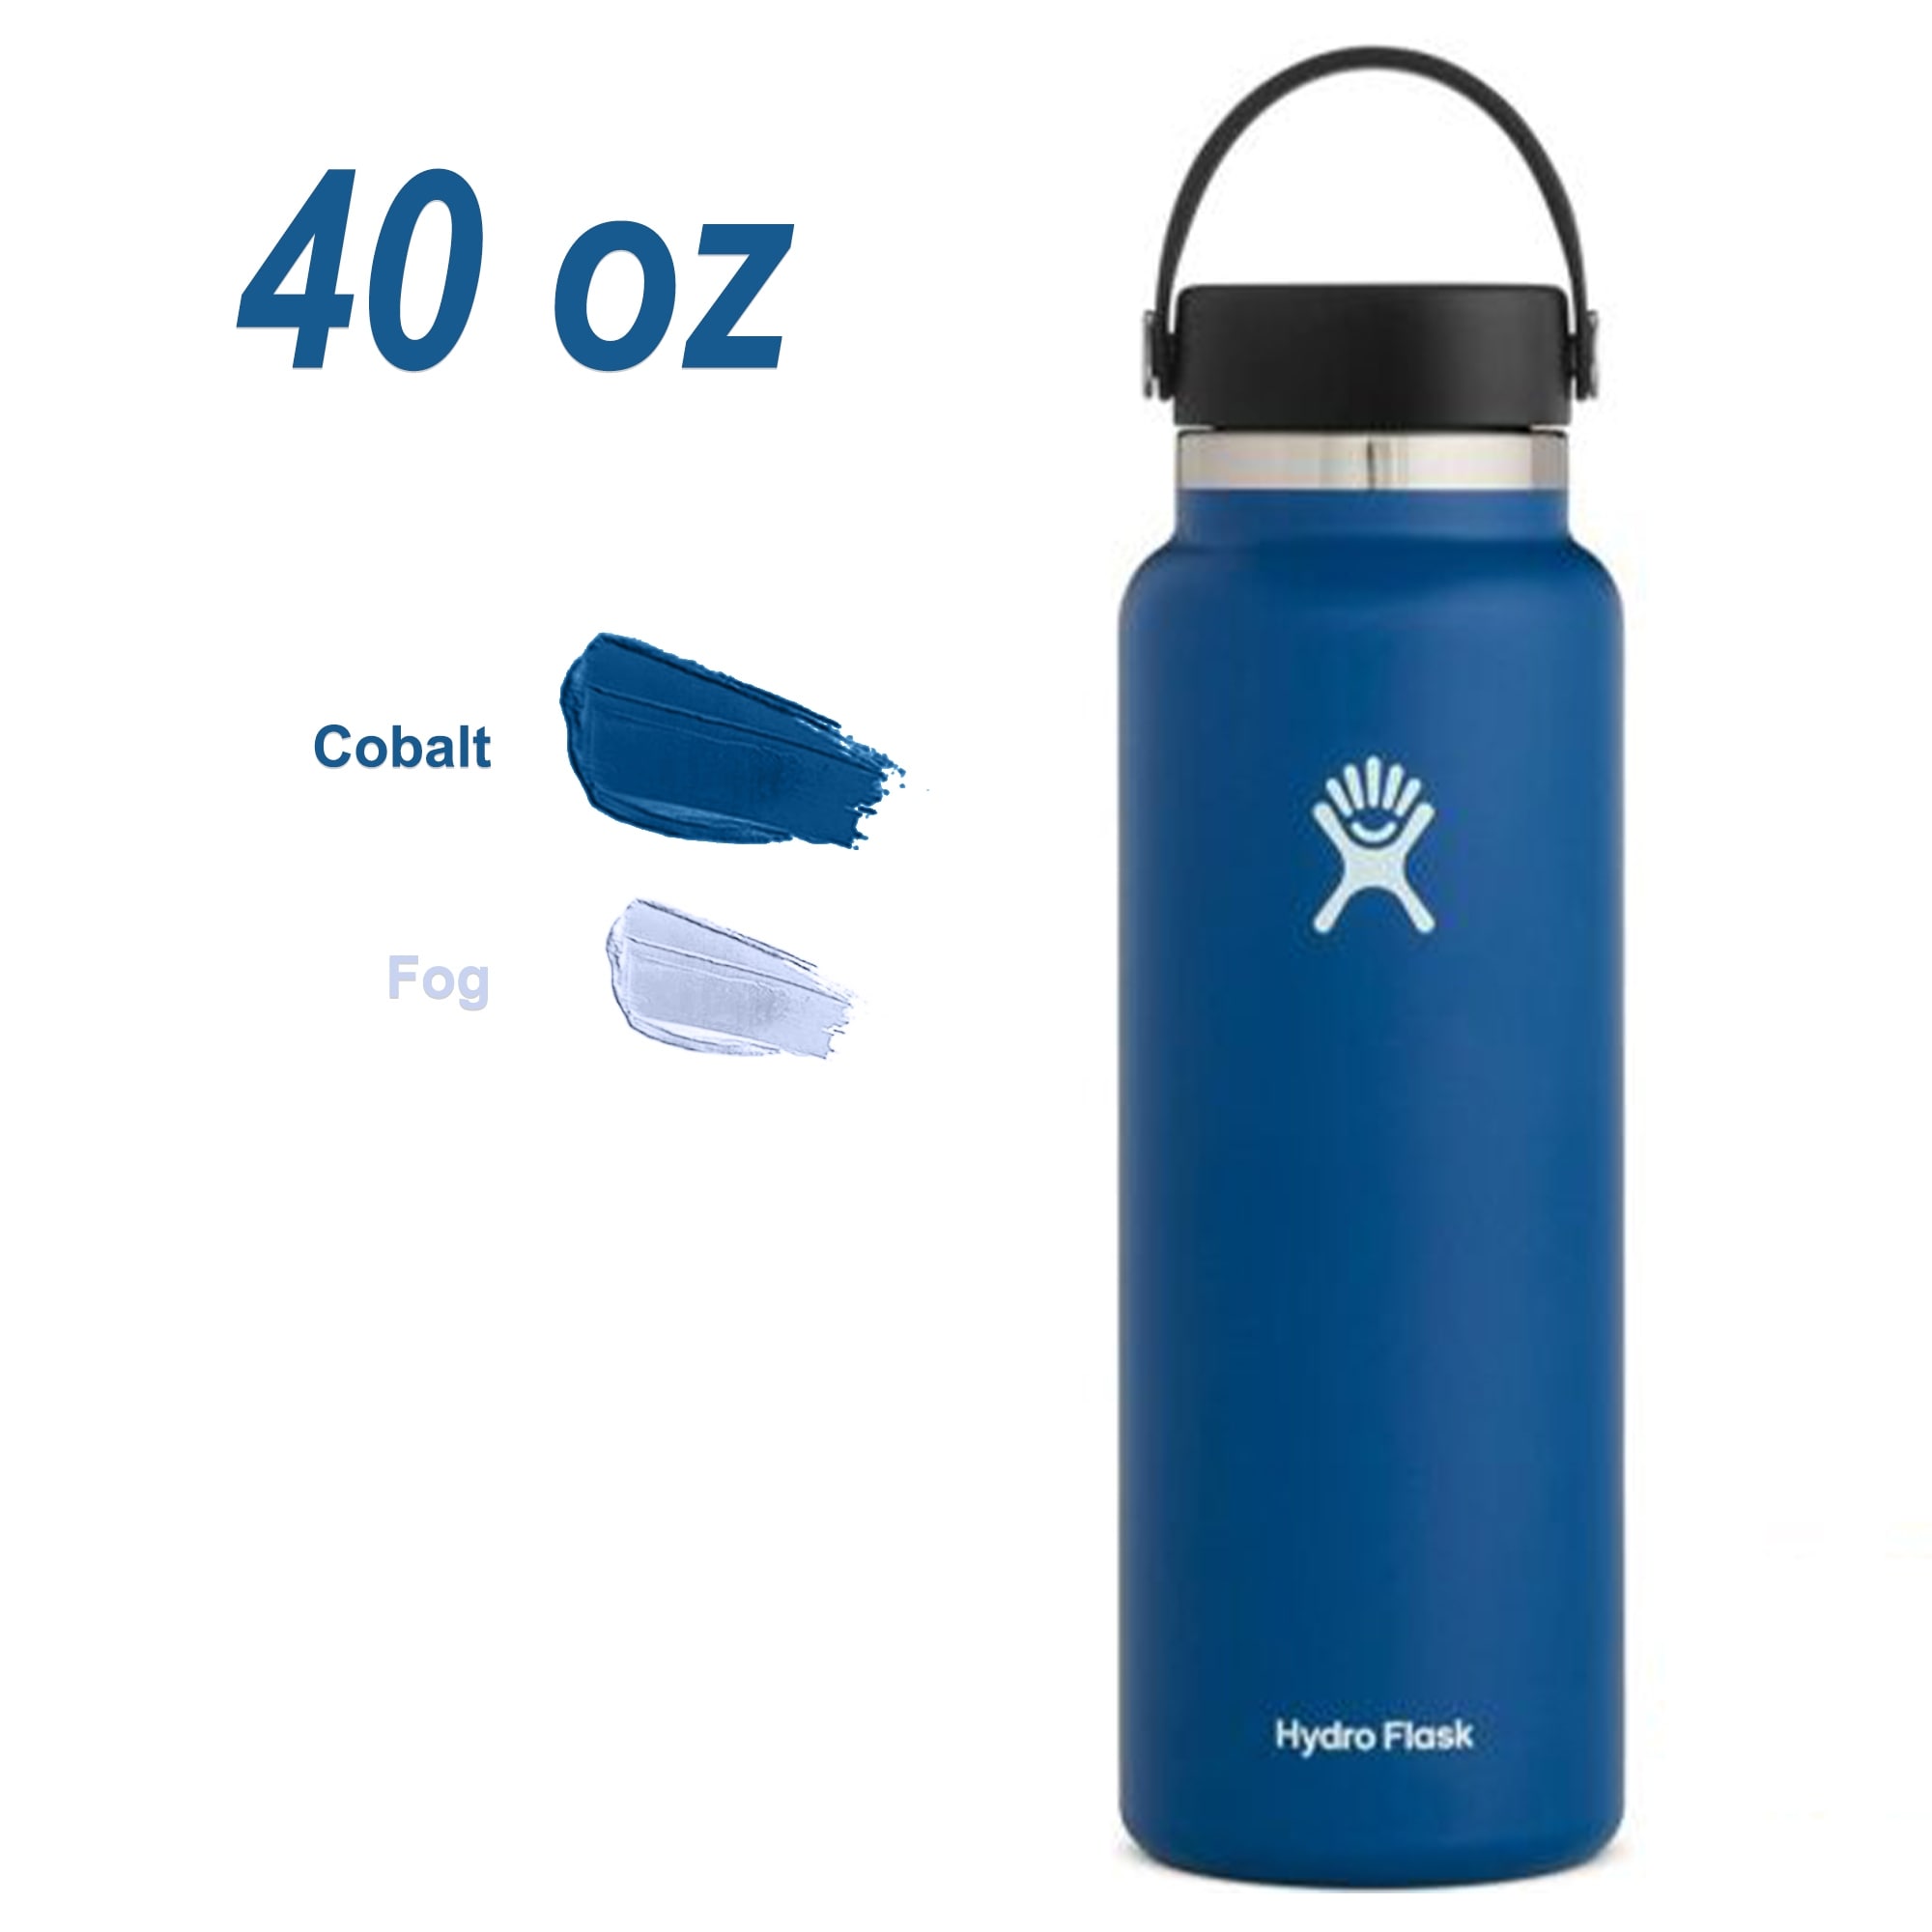 https://ak1.ostkcdn.com/images/products/is/images/direct/82c6fe4a05980e7fce9630bd478497b10f17f0e7/Hydro-Flask-40-oz-Wide-Mouth-Leak-Proof-Water-Bottle.jpg